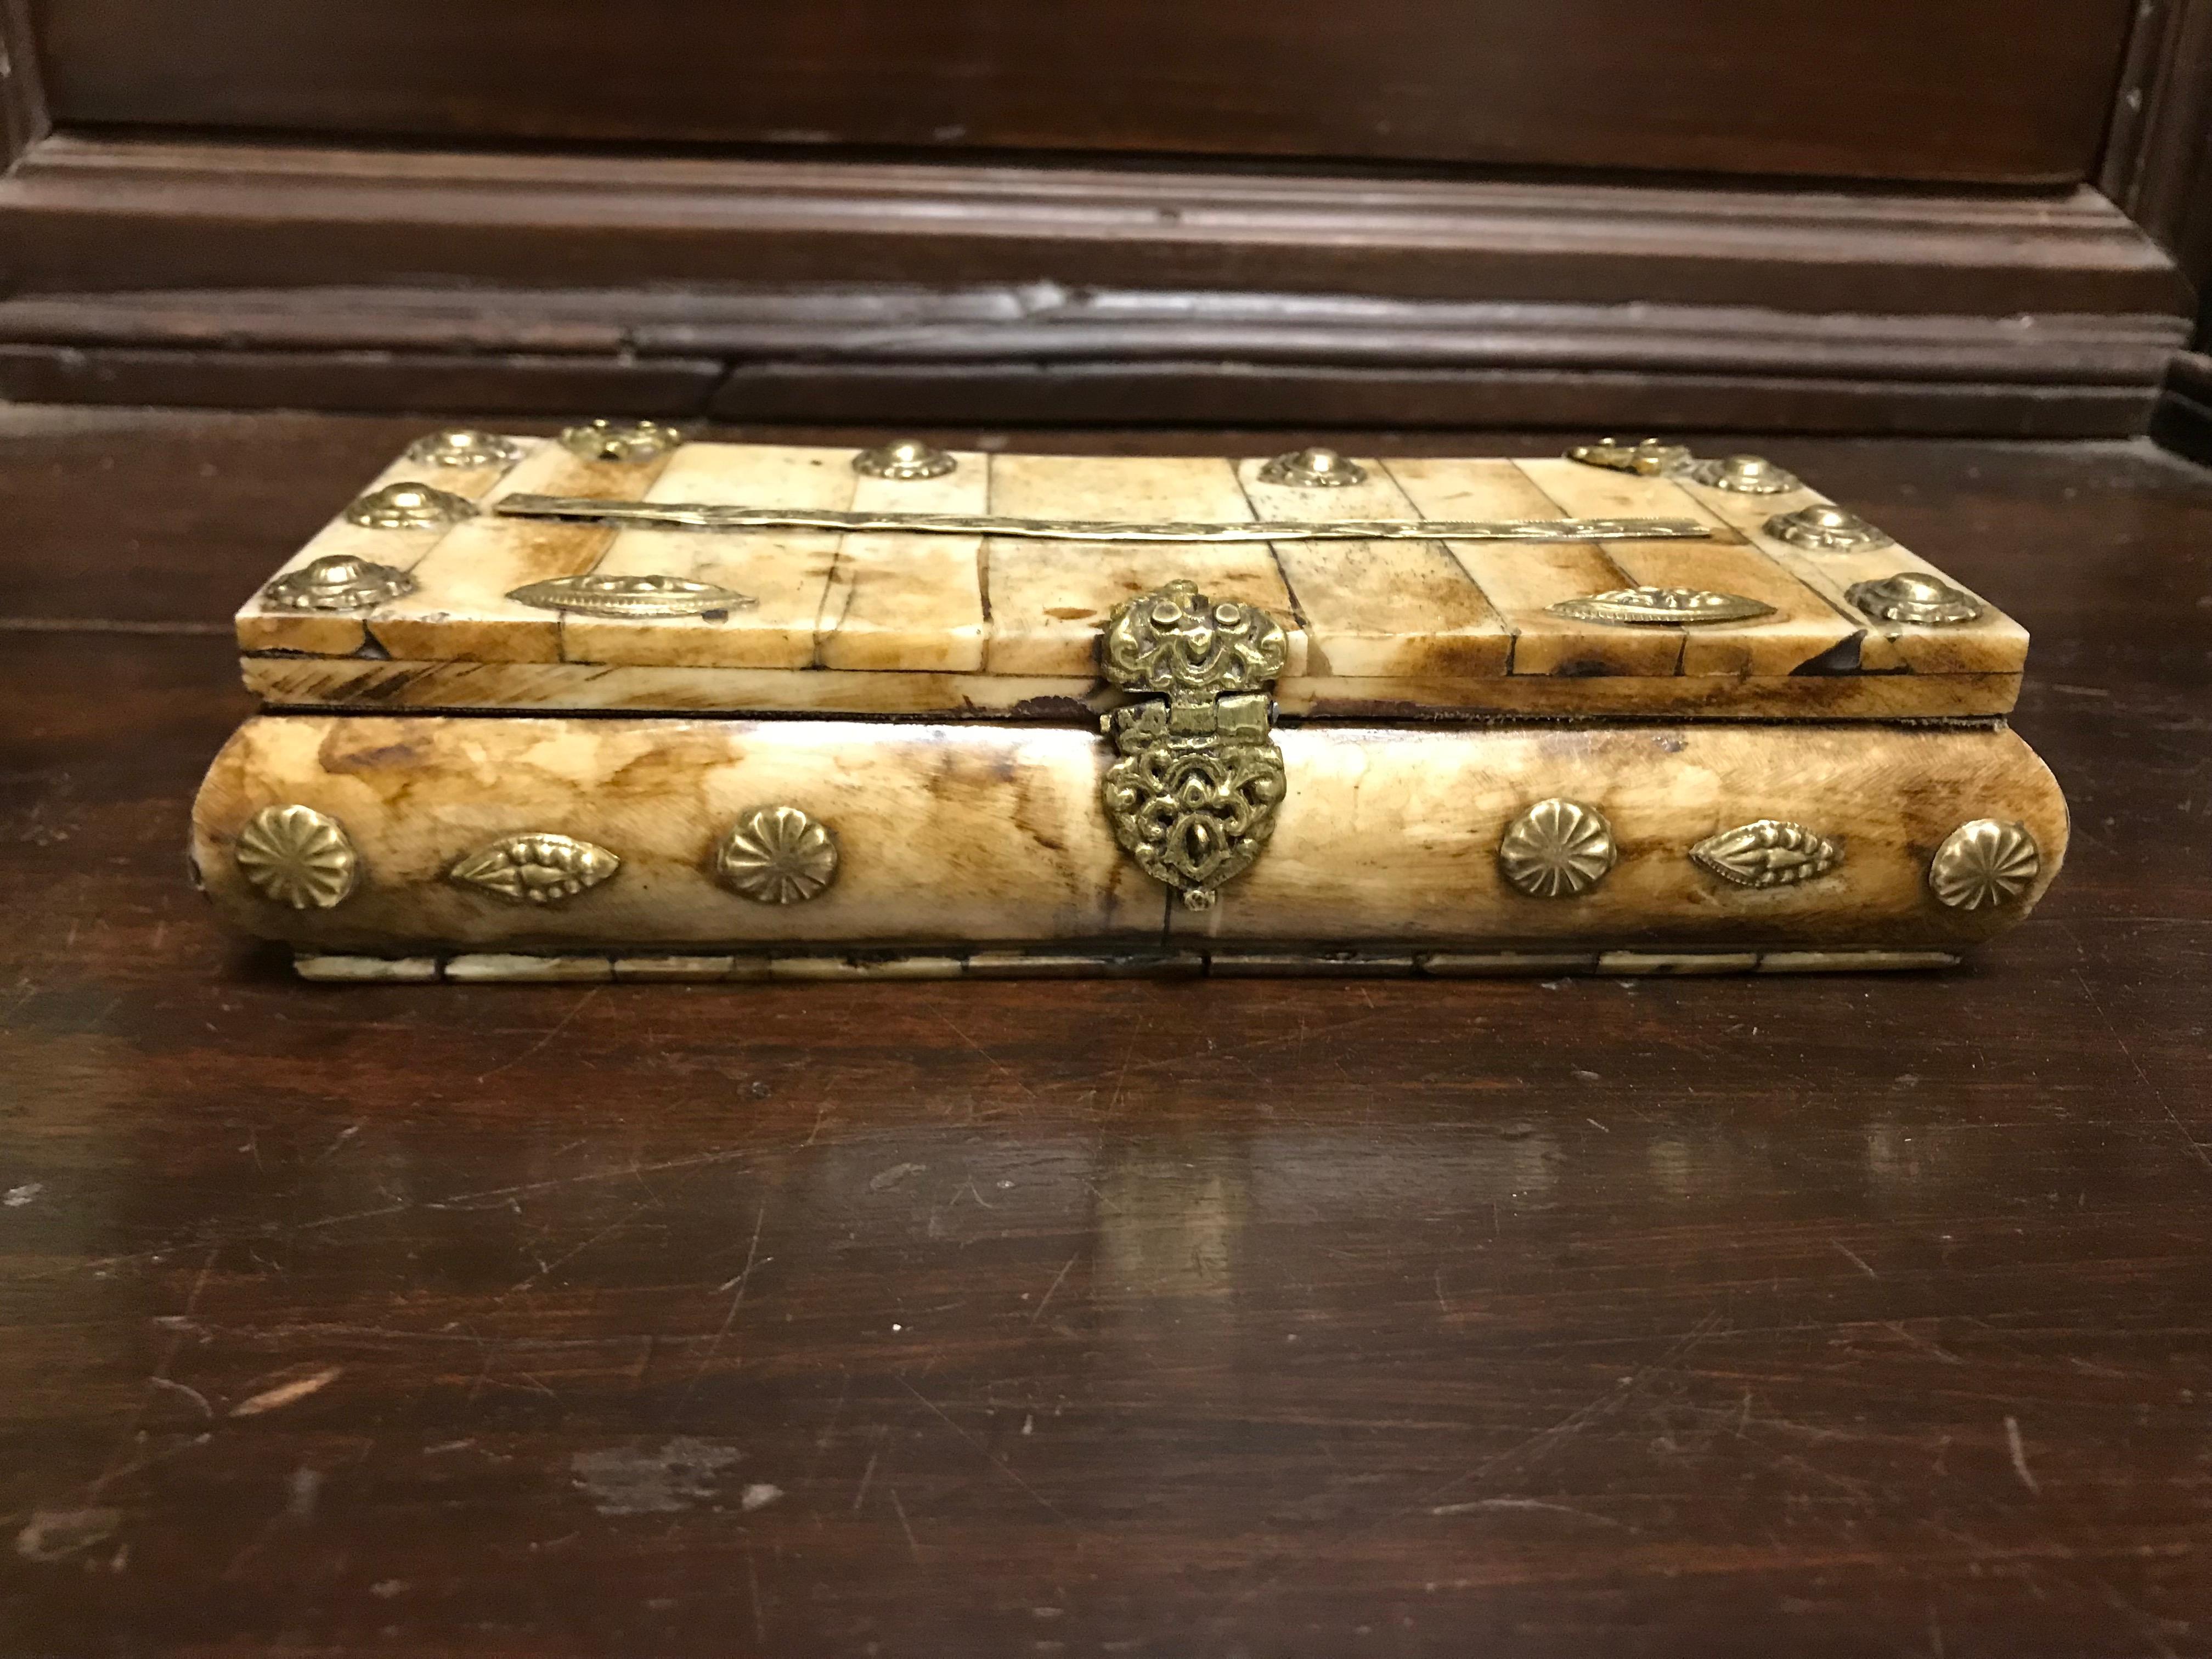 An handsome and quite distinctive Anglo-Indian box of unusual construction. Made of thick bone plaques with repousse brass decorations, hinges and hasp. Lined with black cloth. A fine addition to a box collection, or a singular addition to any